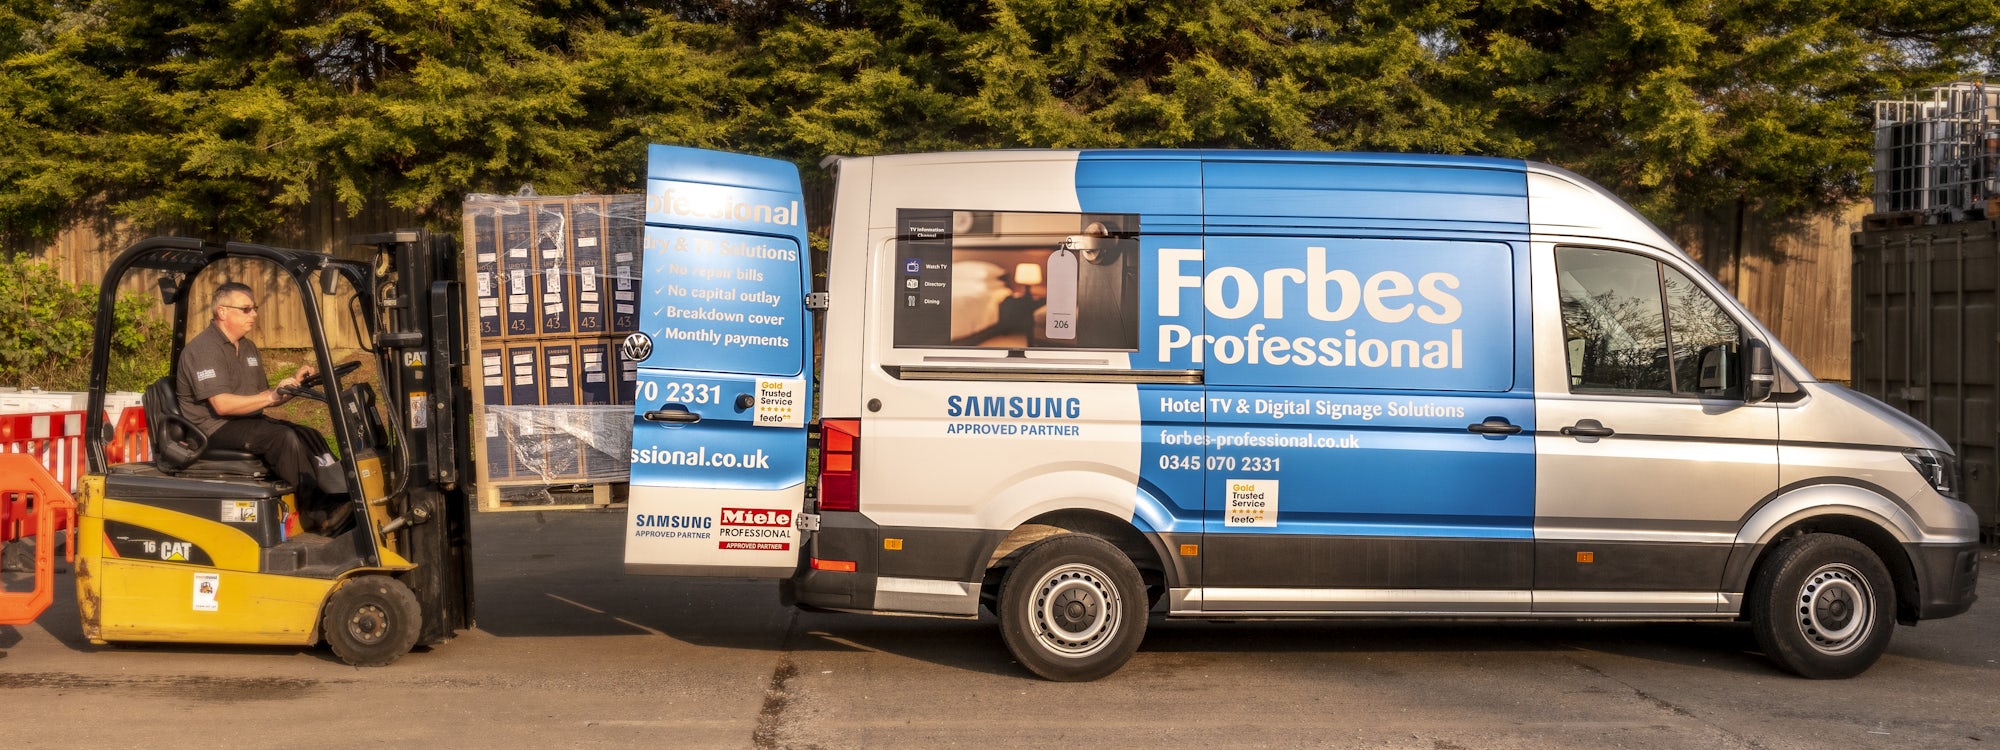 Forbes Professional Van Being Loaded